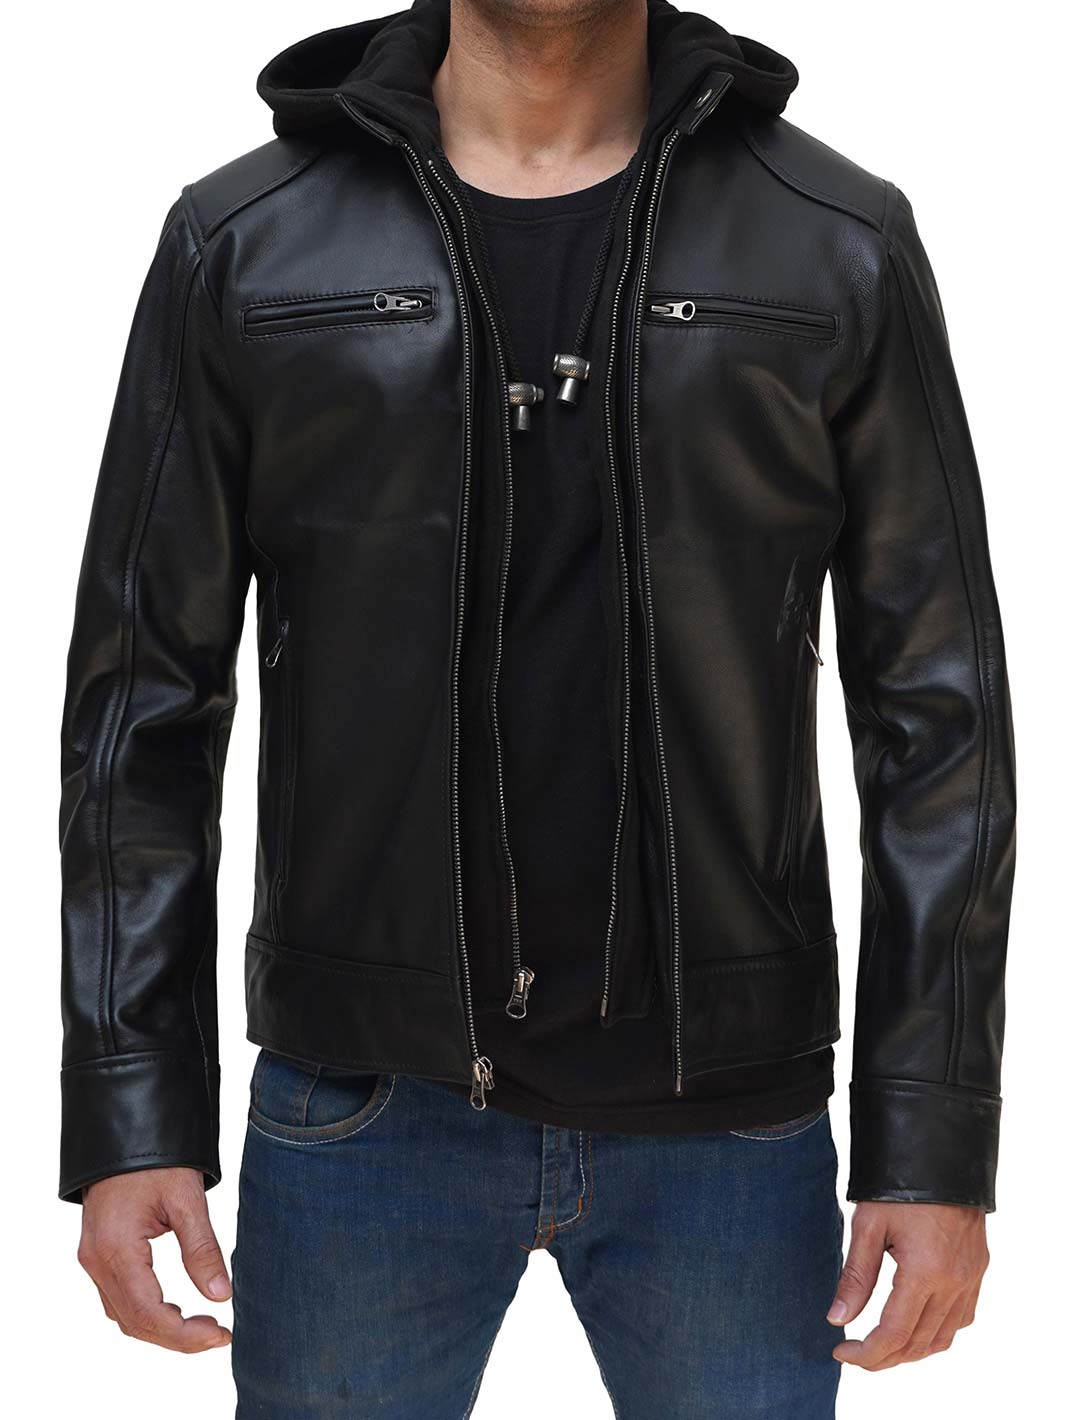 Dodge Mens Black Leather Jacket With Hood | Real Leather | Decrum